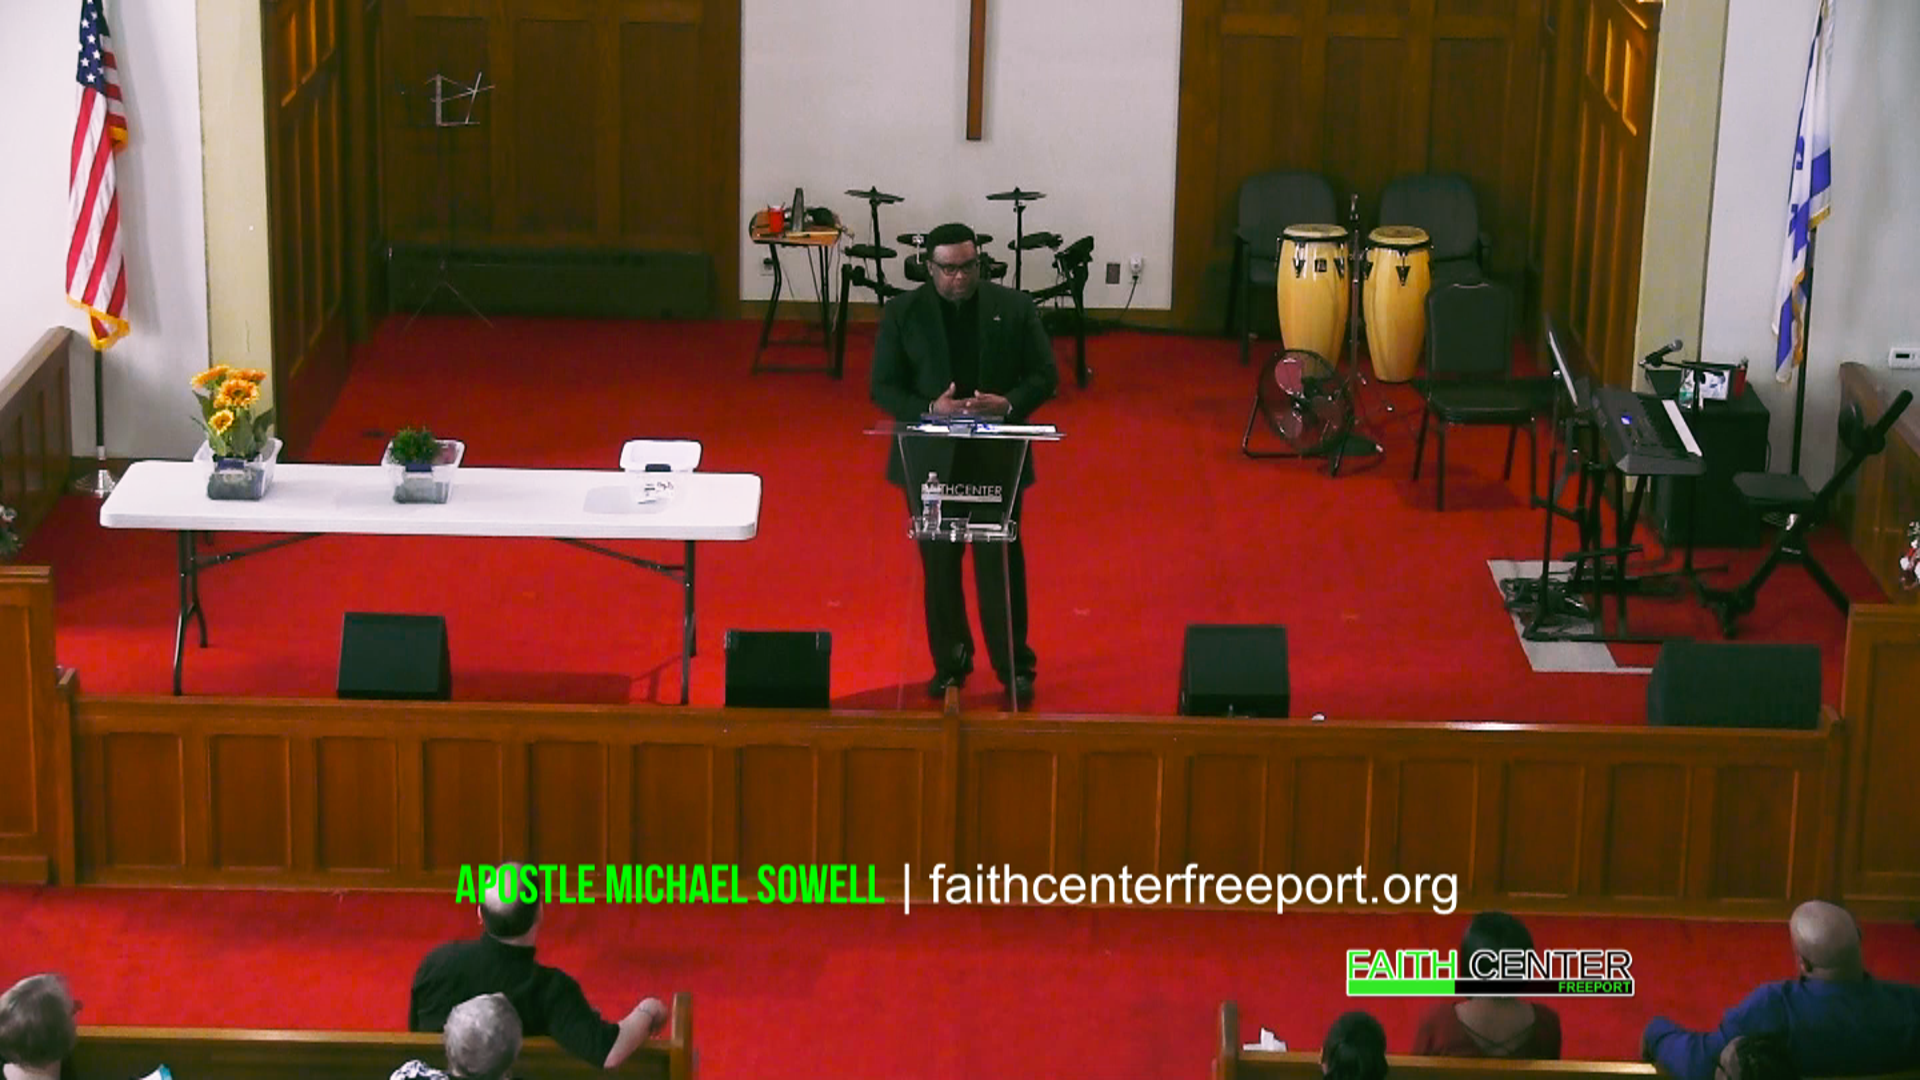 God Made You Perfect The Way You Are – Apostle Michael Sowell